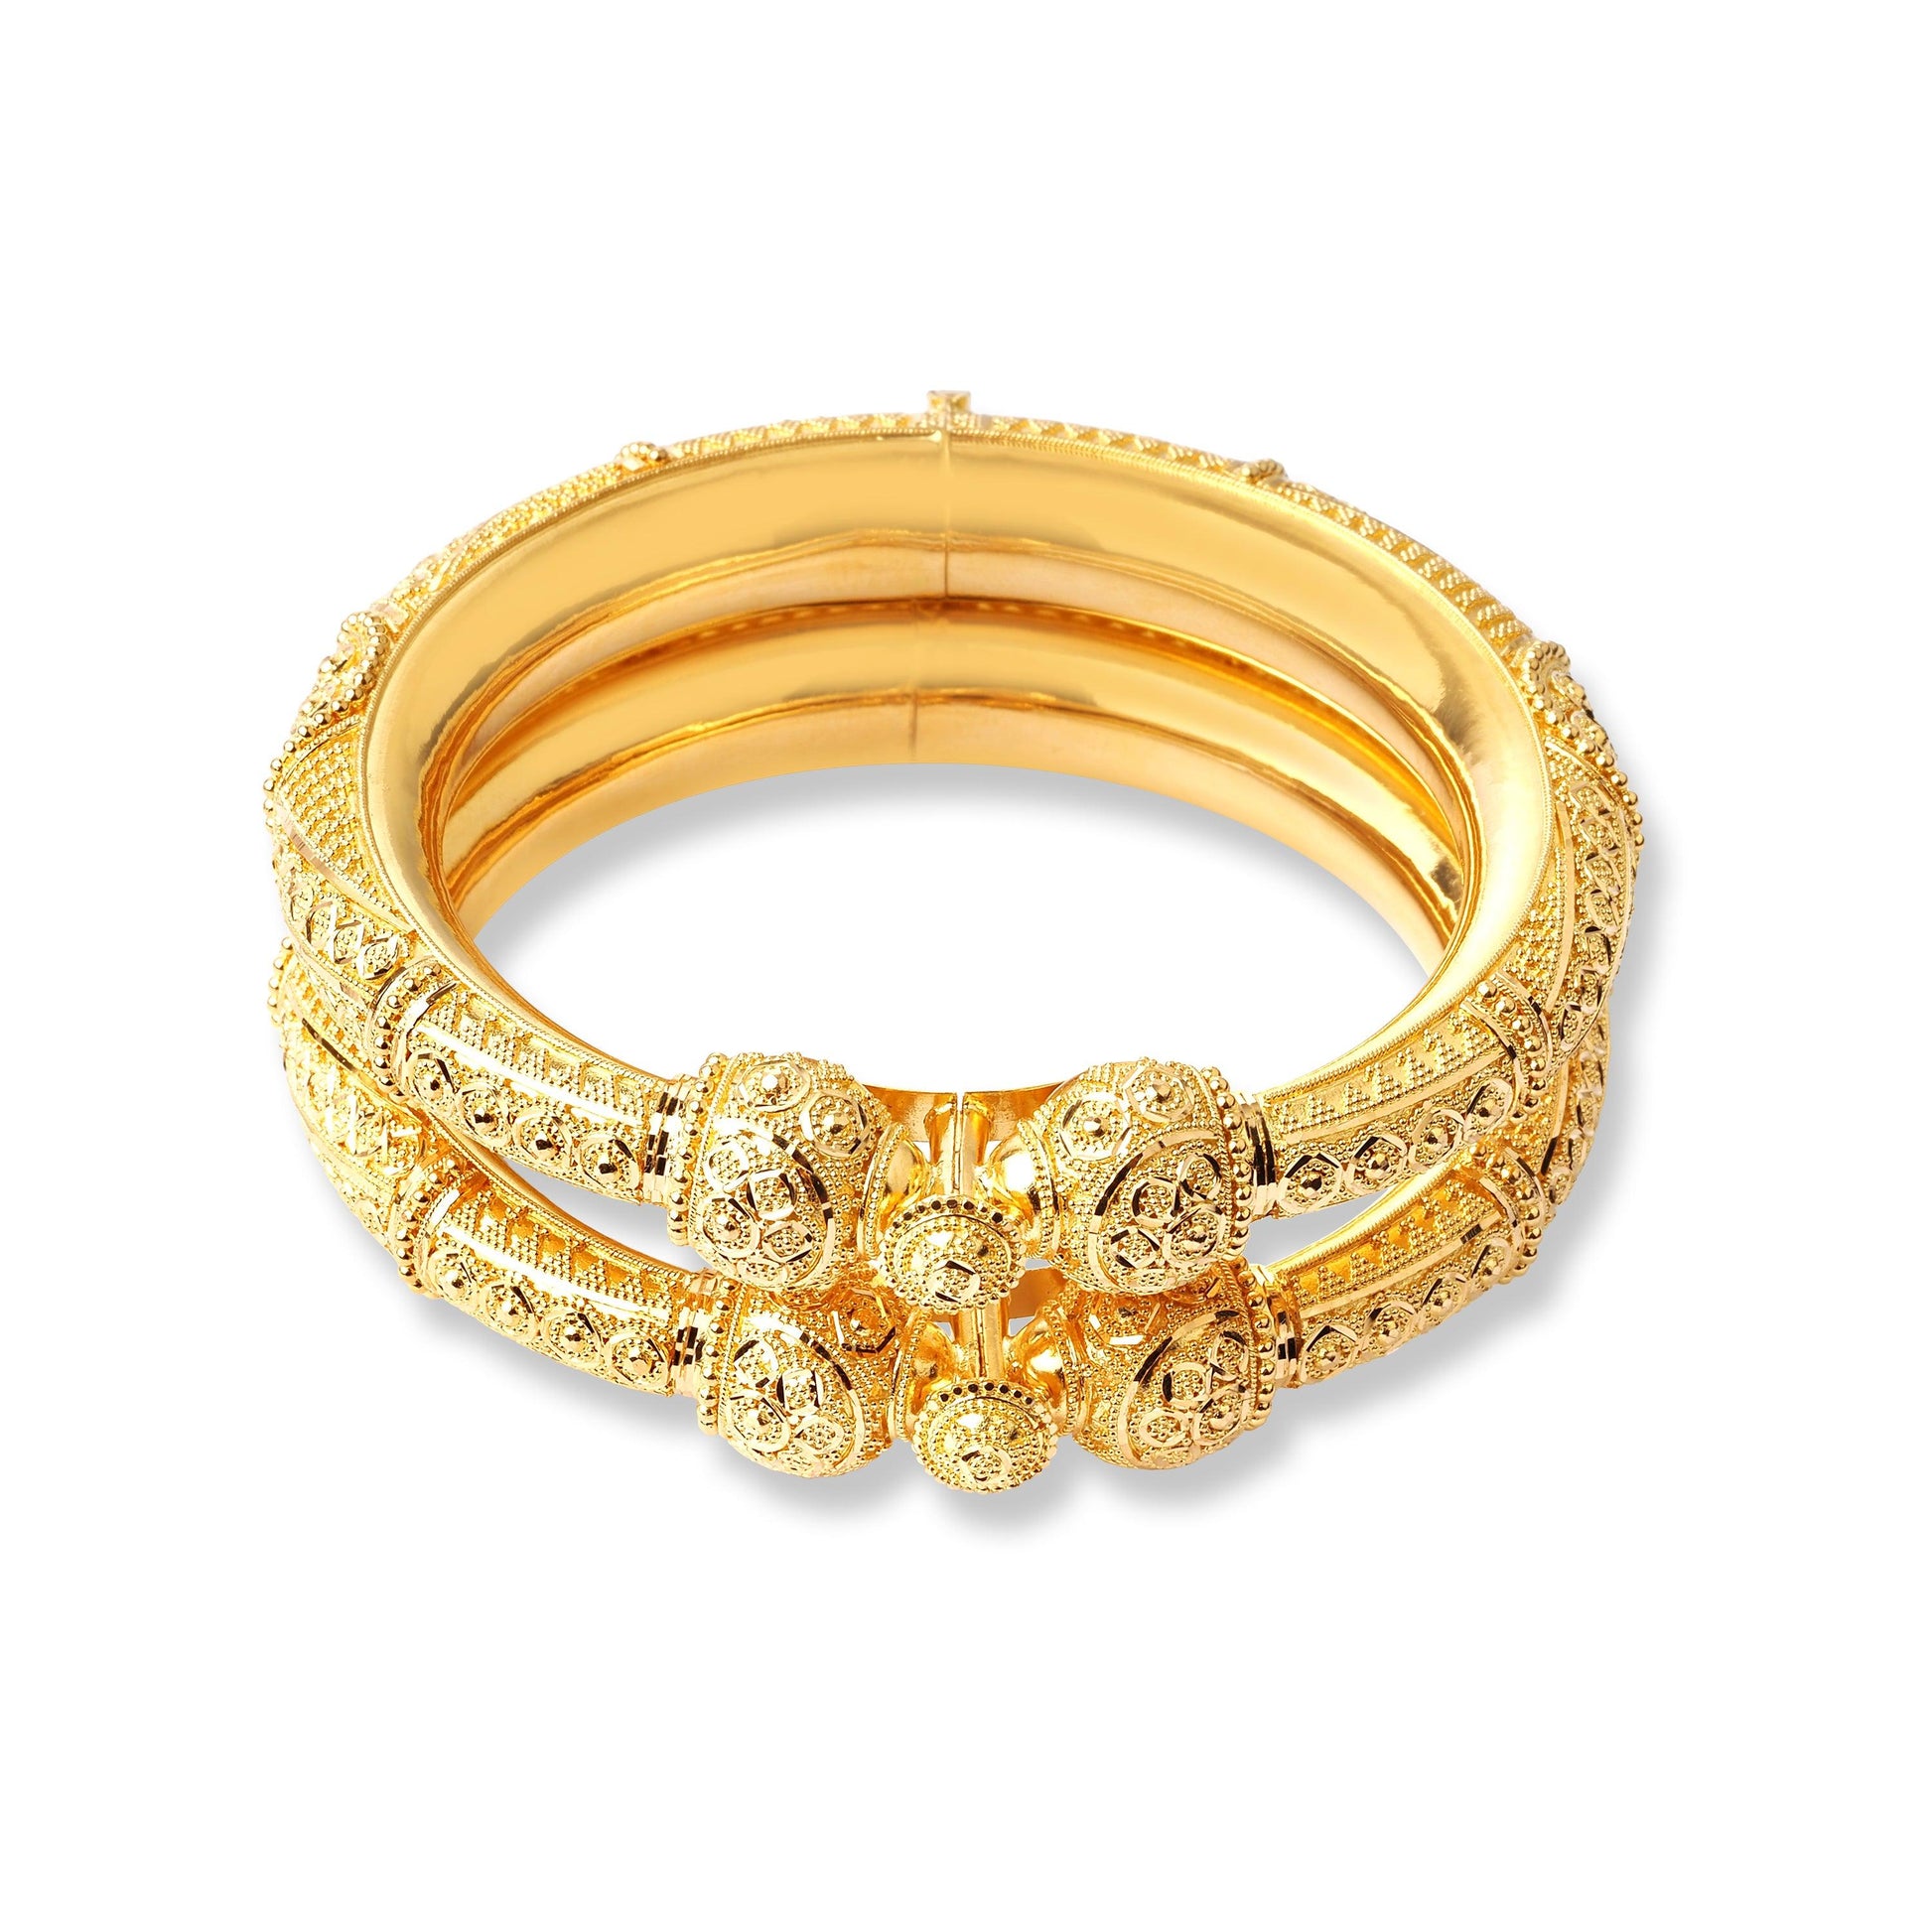 Pair of 22ct Hollow Tube Bangles With Hinge & Openable Screw Fitting B-8511 - Minar Jewellers